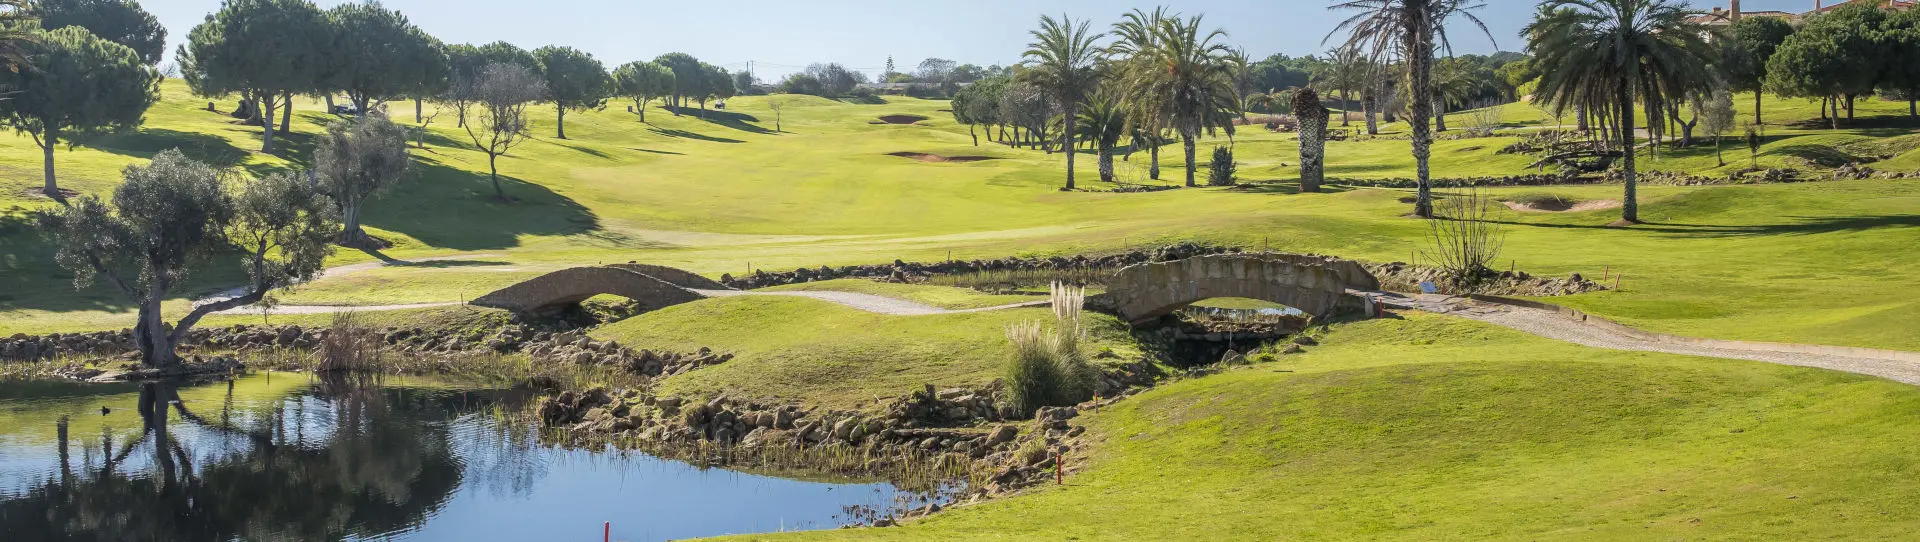 Portugal golf holidays - 7 Nights SC & Unlimited Golf Rounds - Photo 3